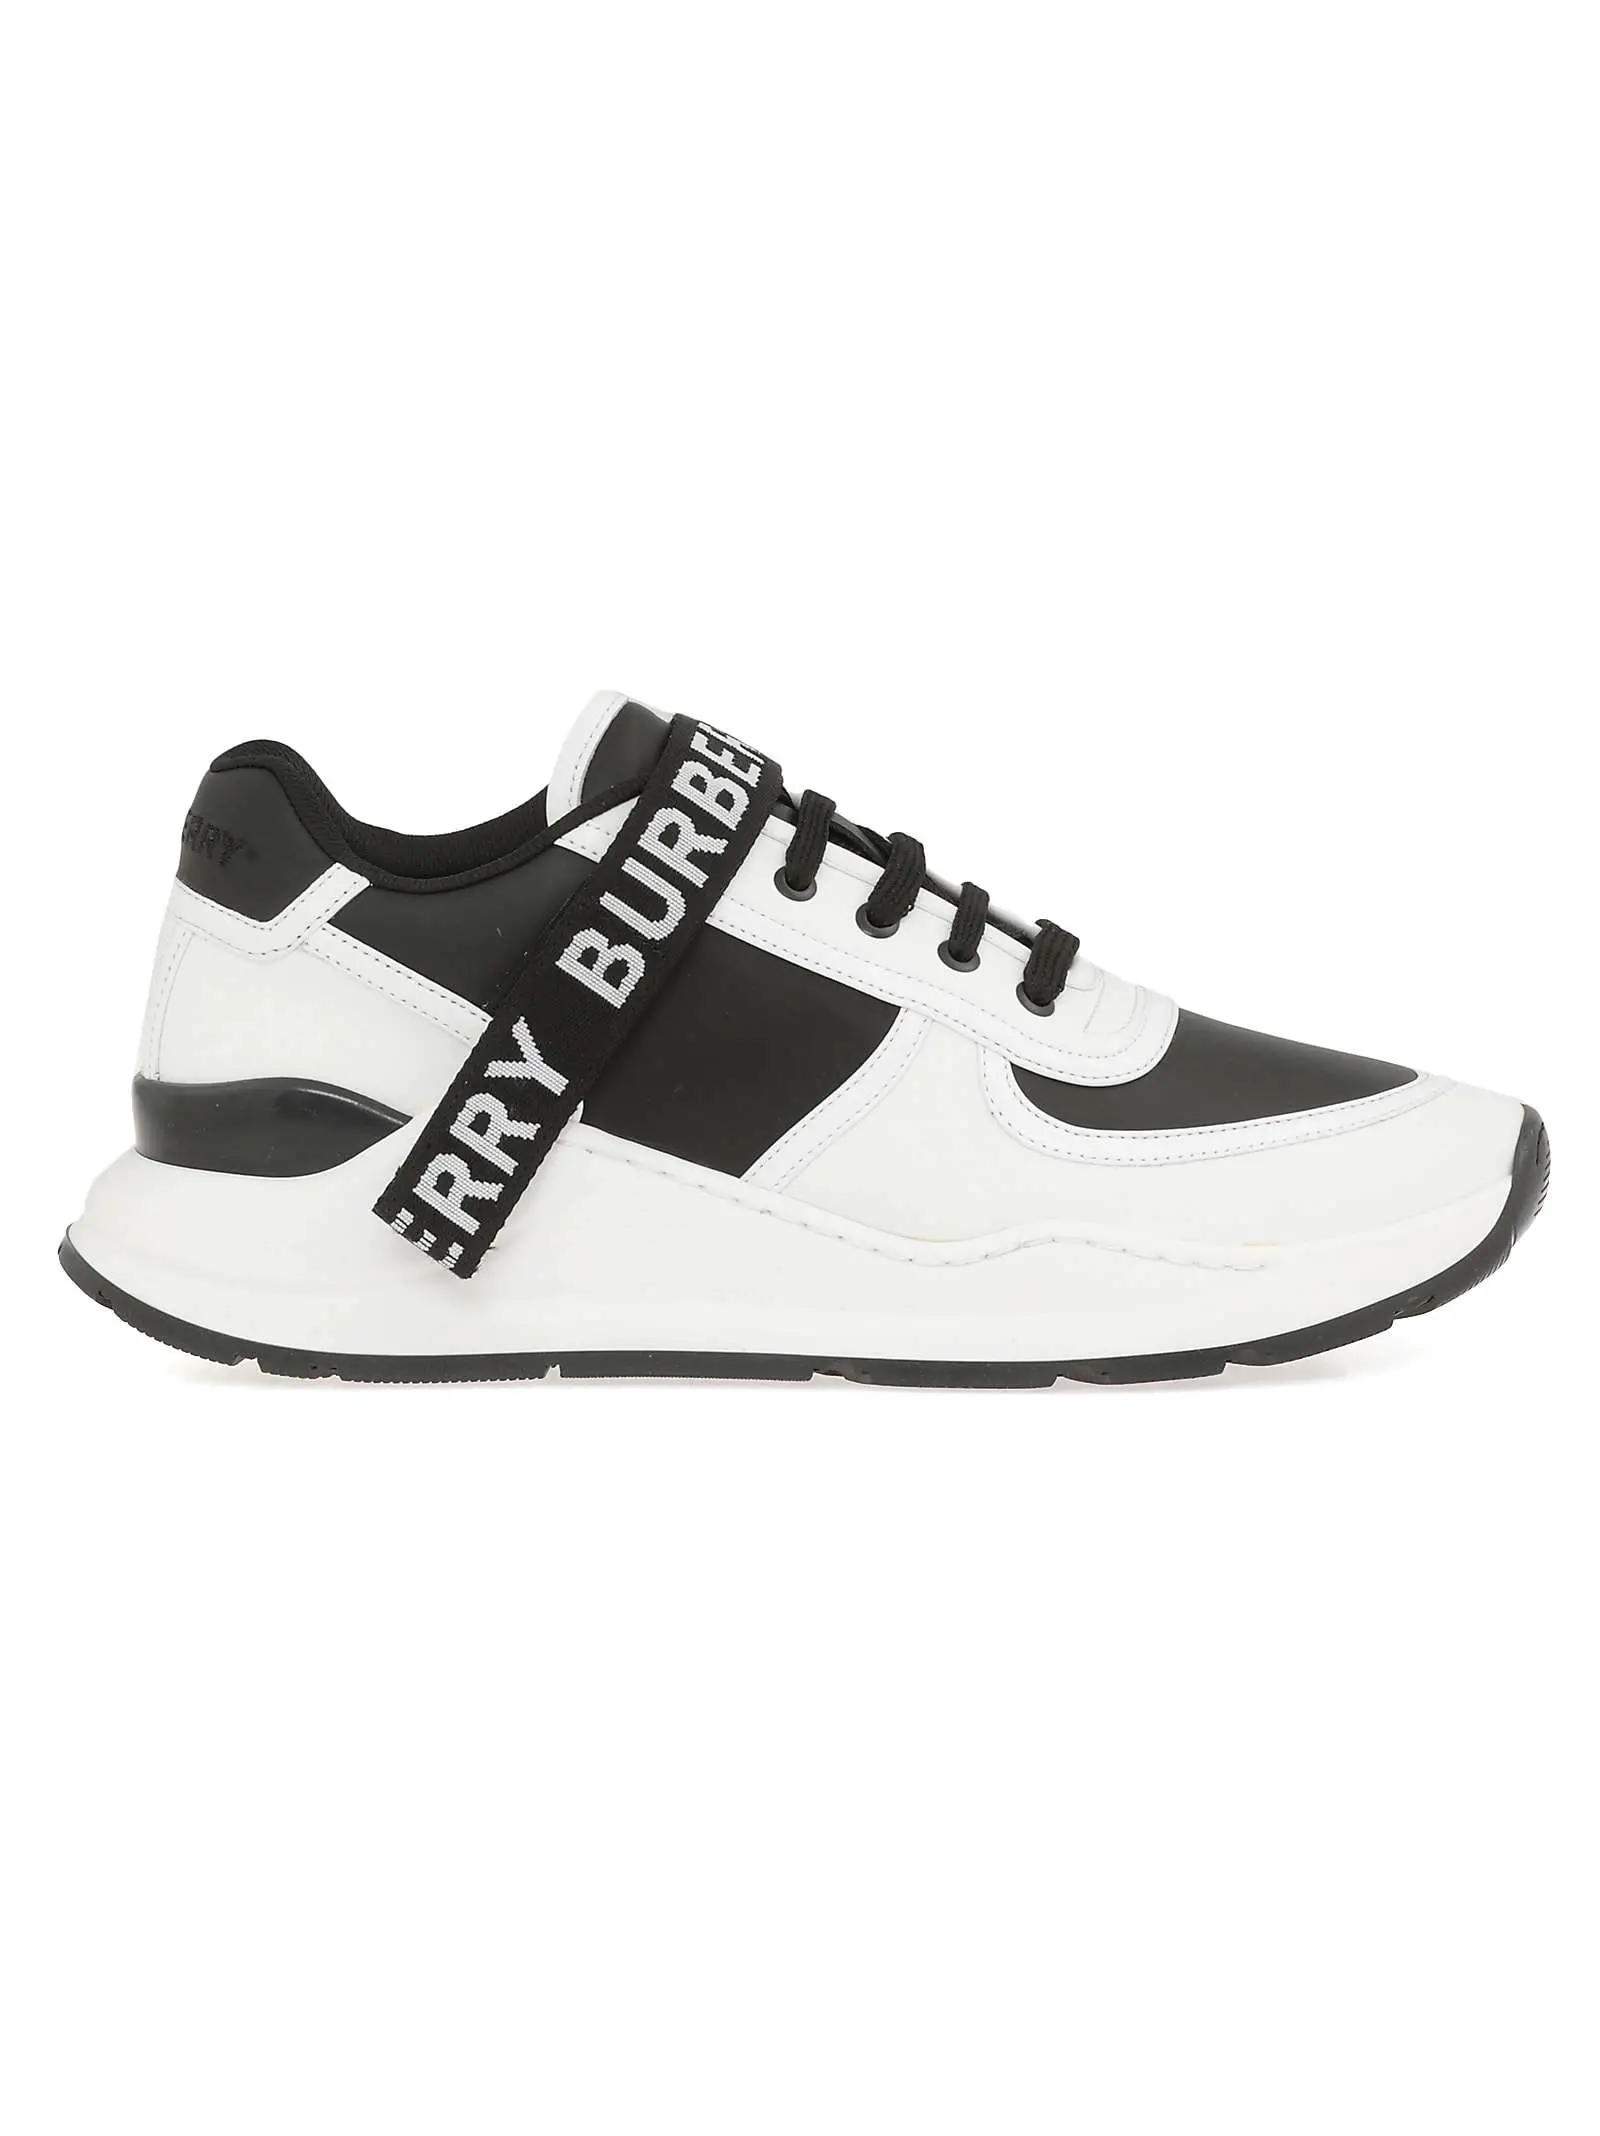 Burberry Burberry Ronnie Sneaker